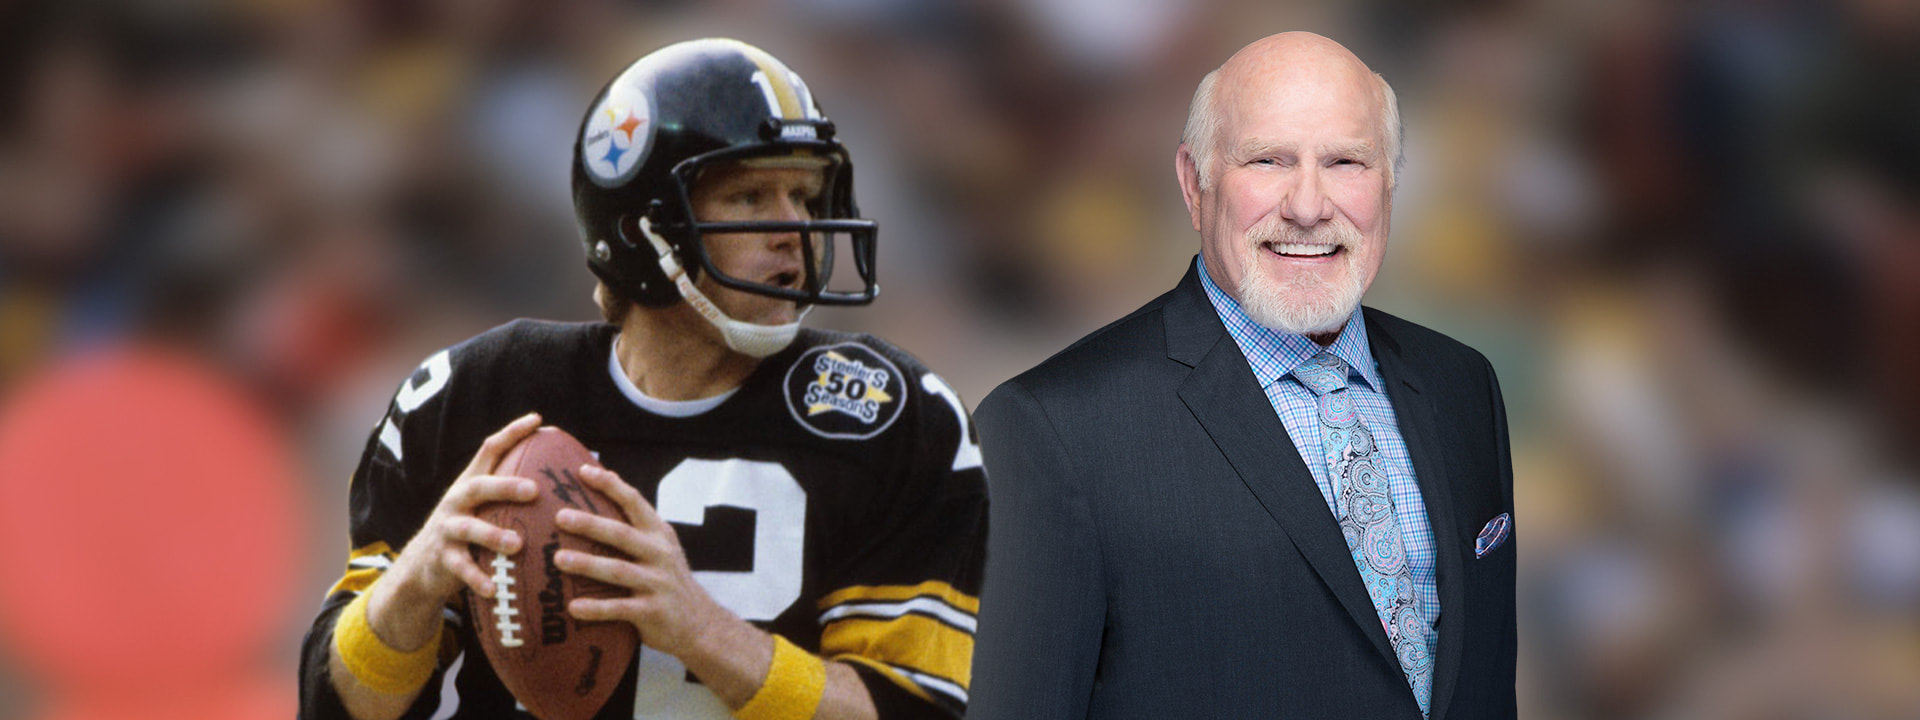 Terry Bradshaw to serve as Grand Marshal for the 95th Shenandoah Apple Blossom Festival